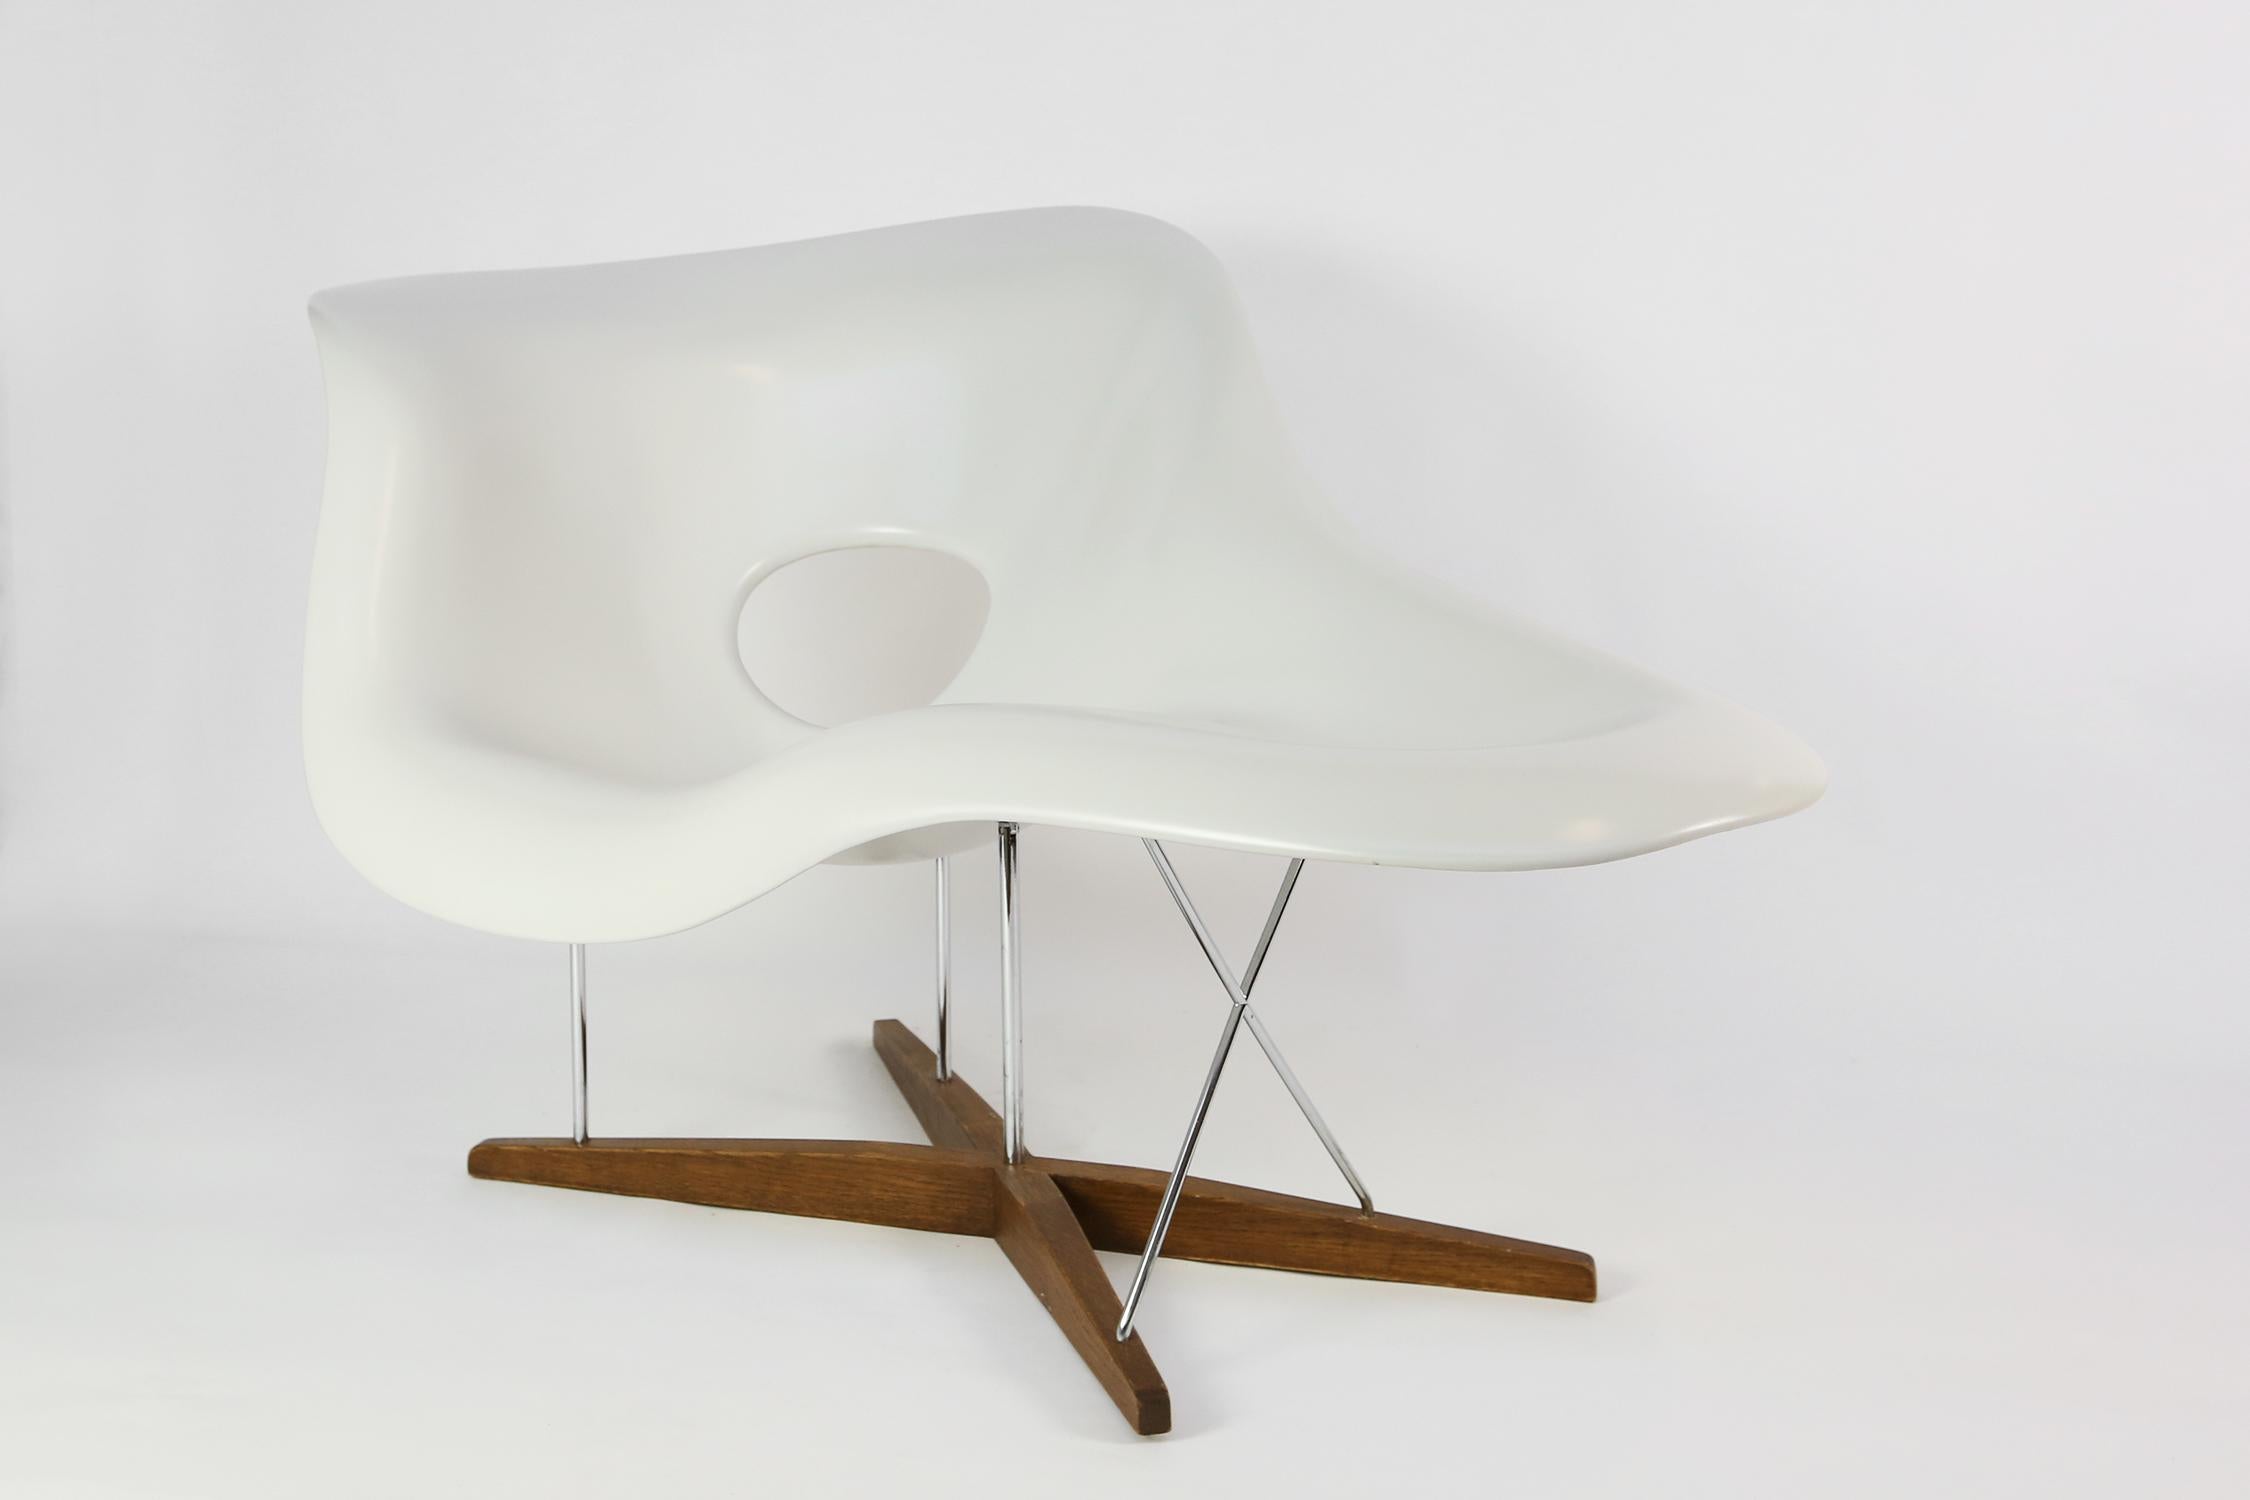 German La Chaise by Charles & Ray Eames For Vitra